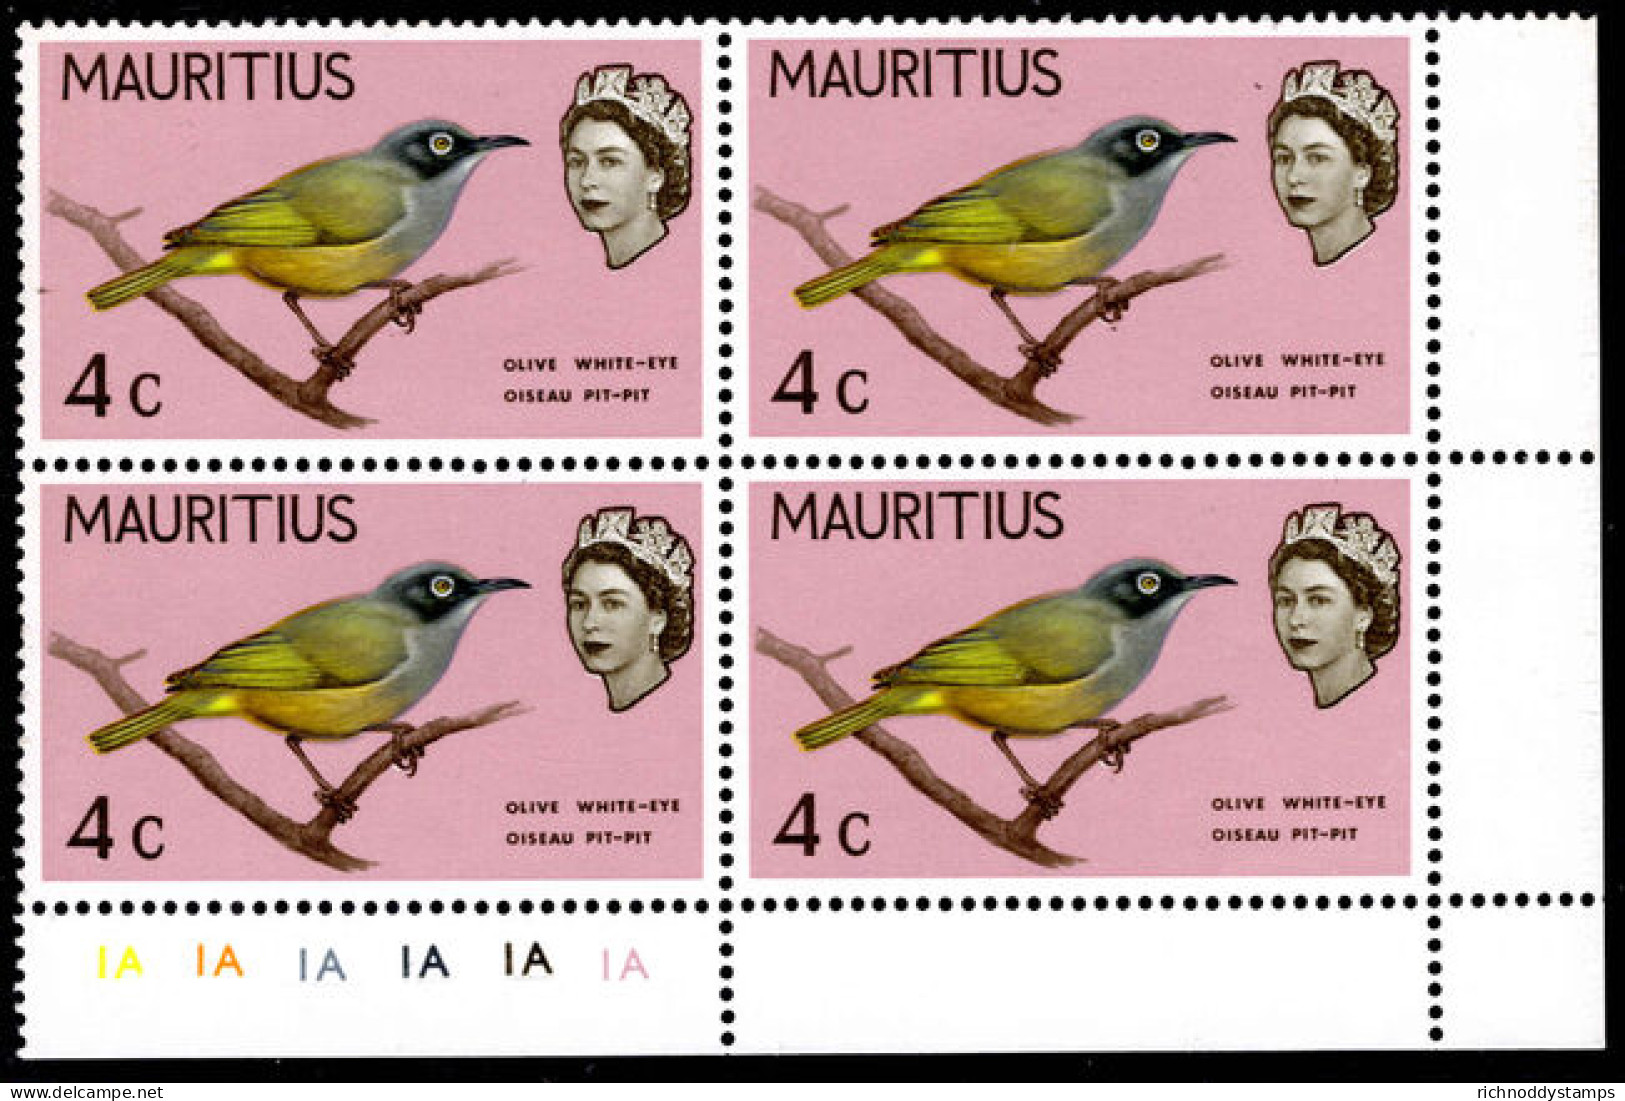 Mauritius 1965 4c With Minor Variety Broken Claw Block Of 4 Unmounted Mint. - Mauritius (1968-...)